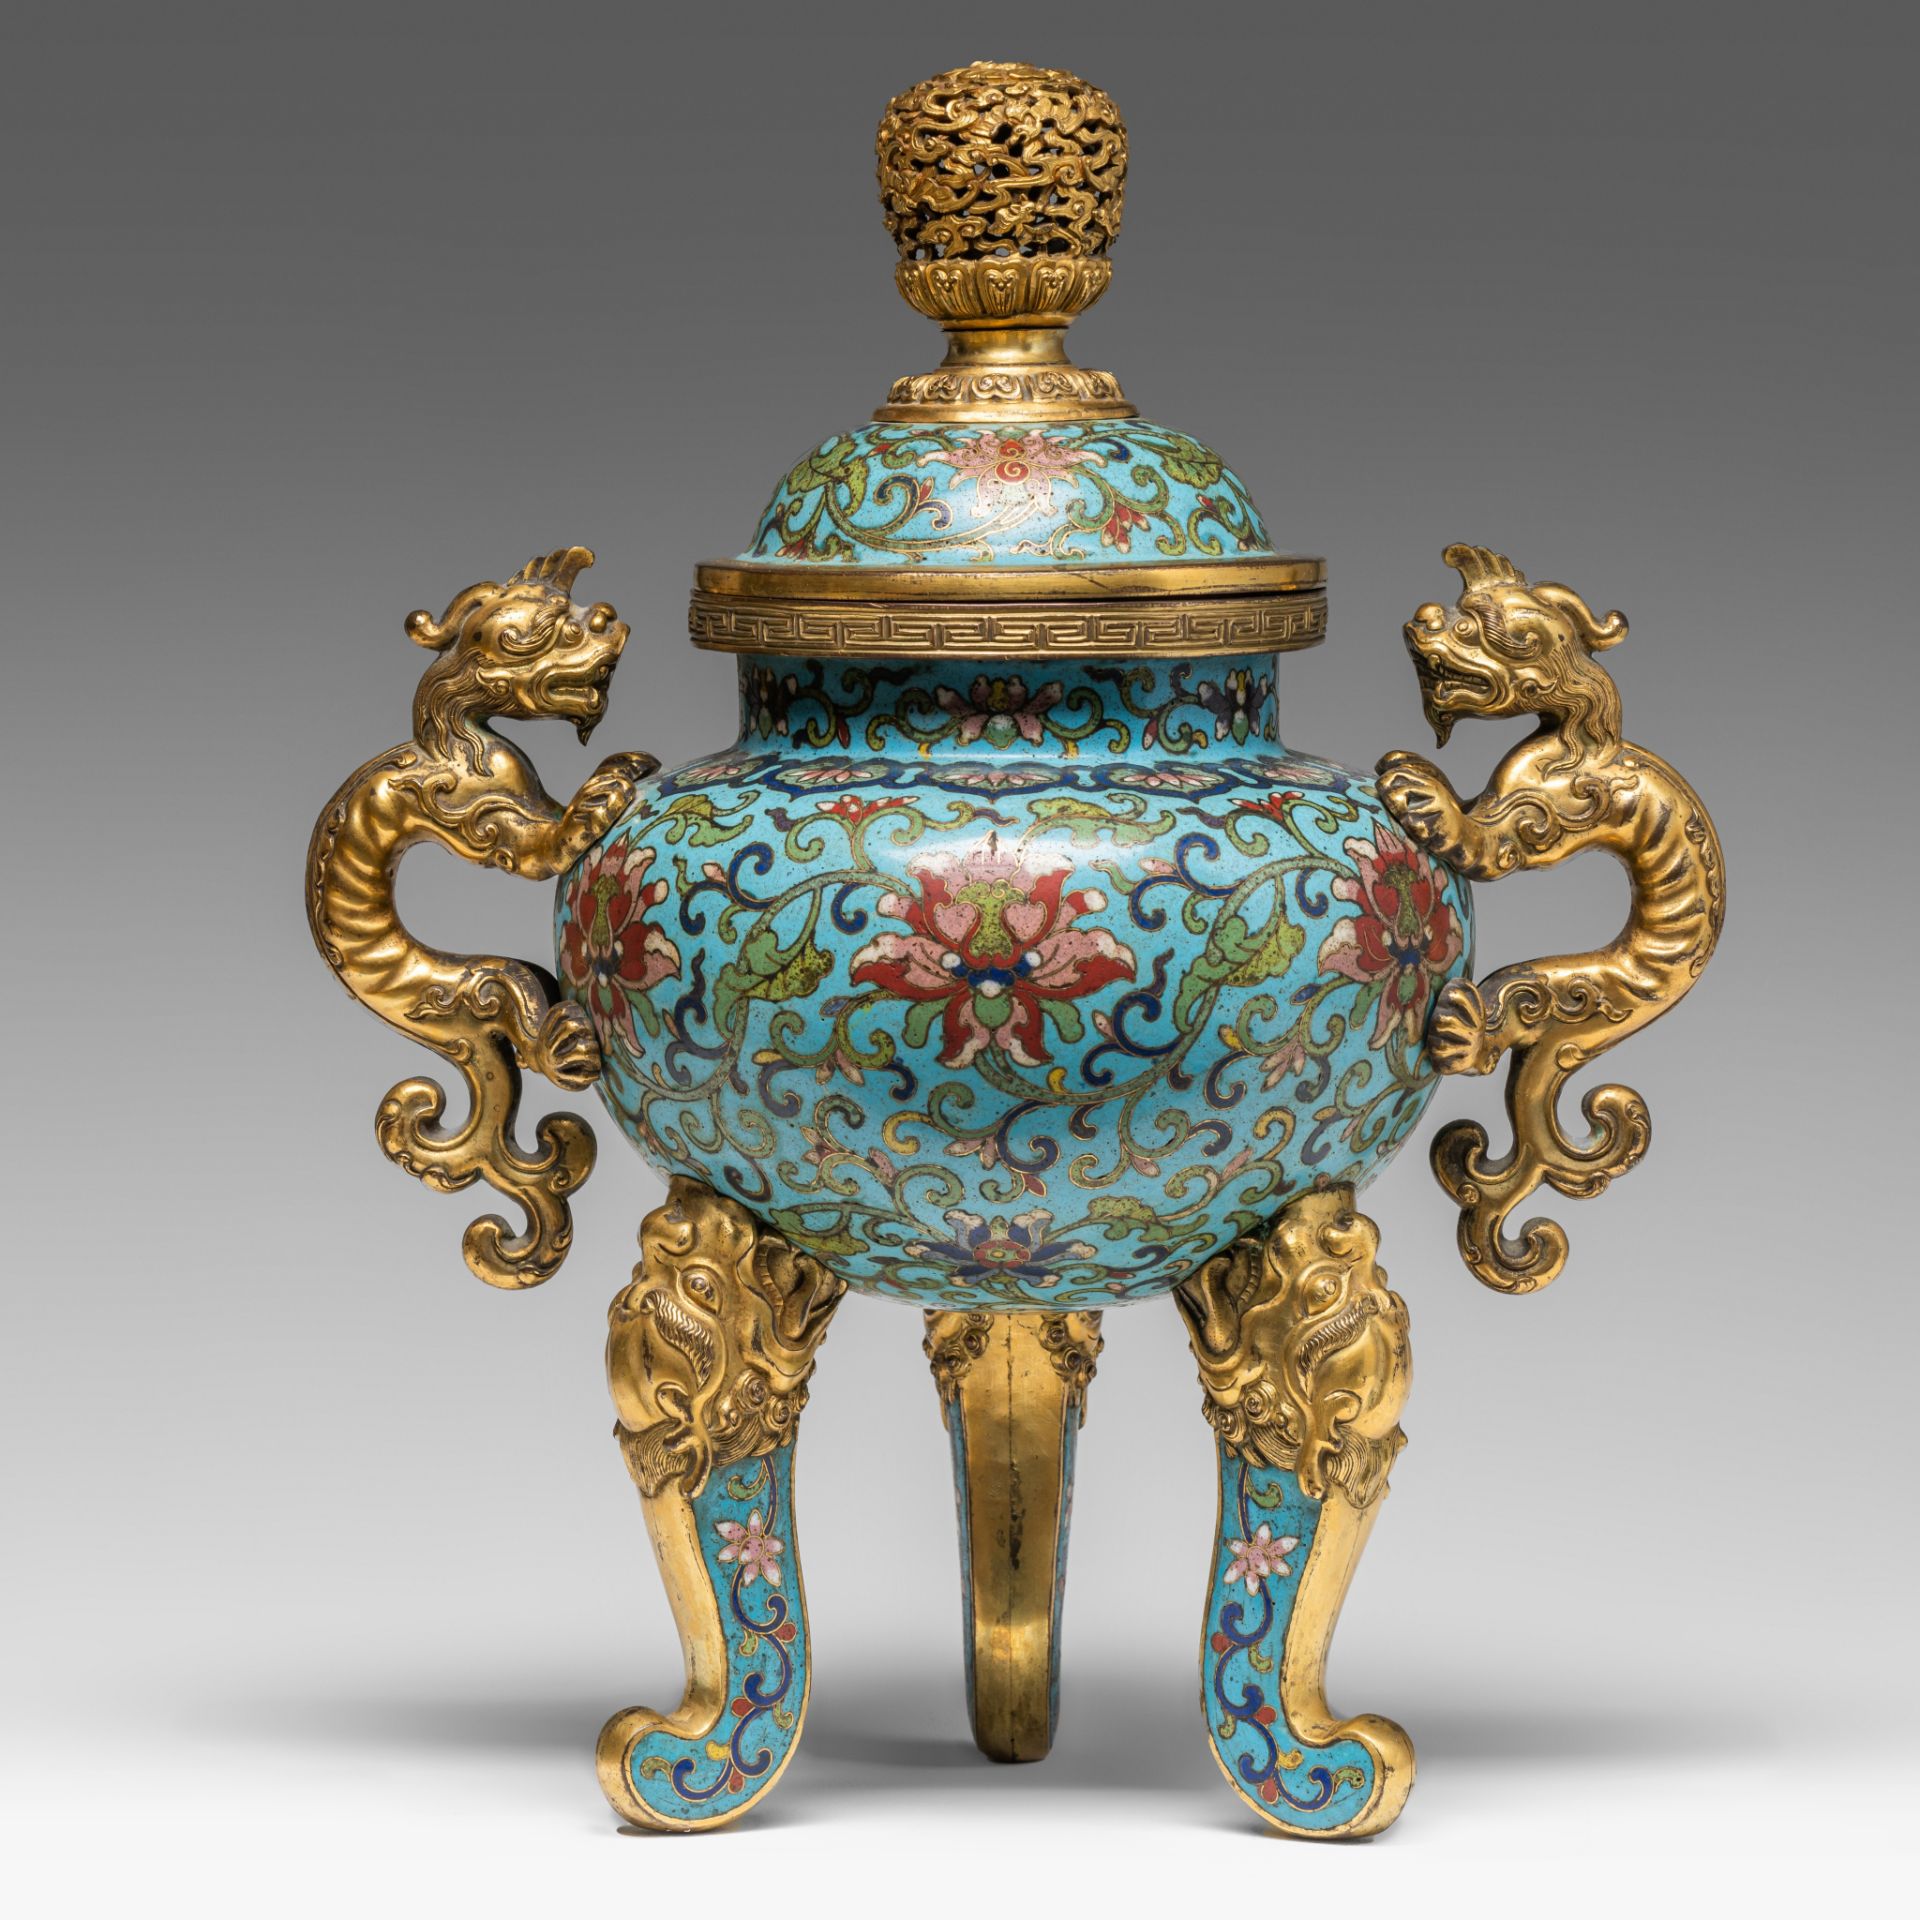 A fine Chinese cloisonne enamelled tripod censer and cover, late 18thC, H 32,8 cm